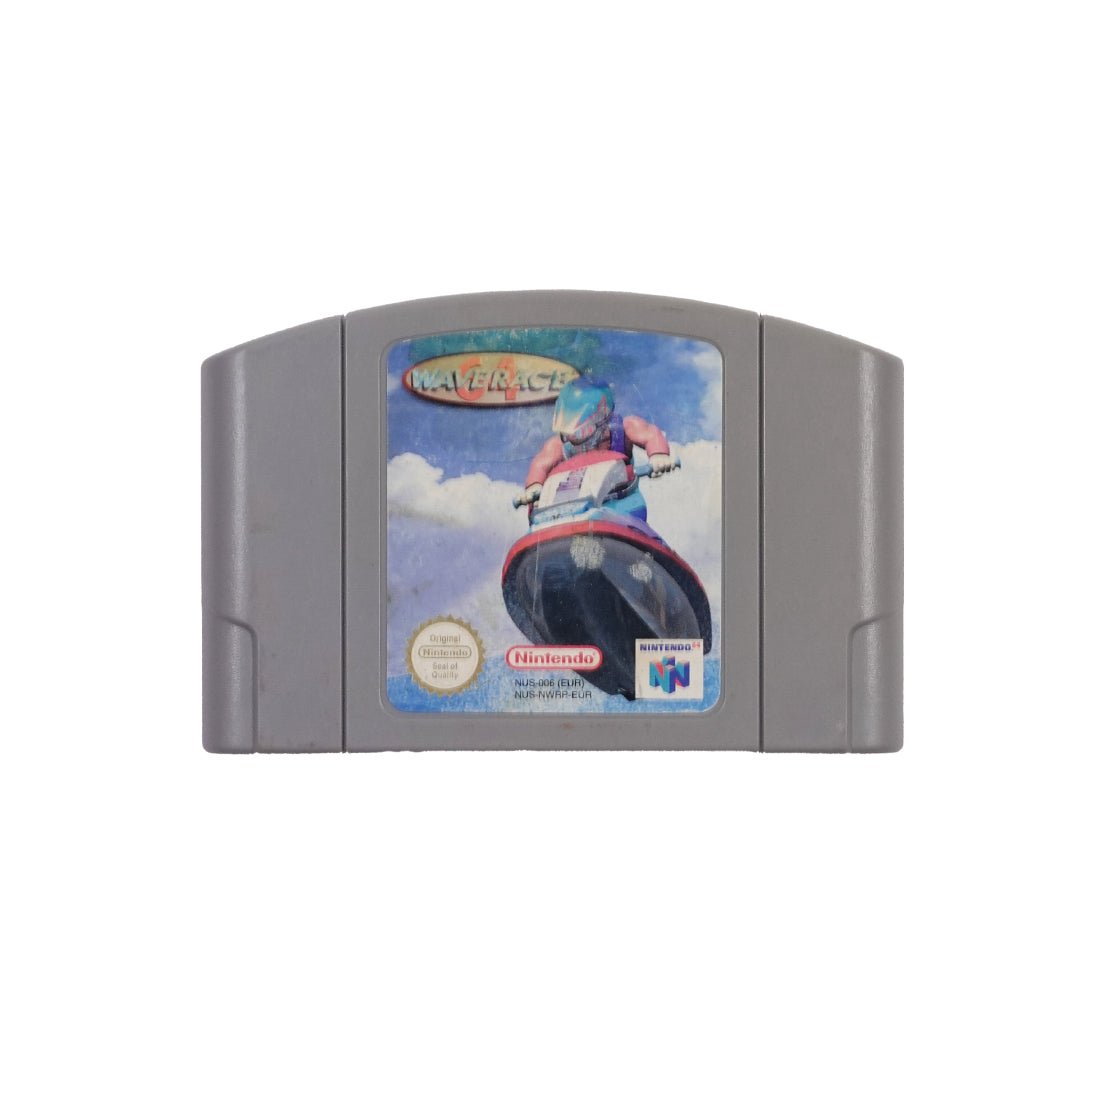 (Pre-Owned) Wave Race - Nintendo 64 - Store 974 | ستور ٩٧٤